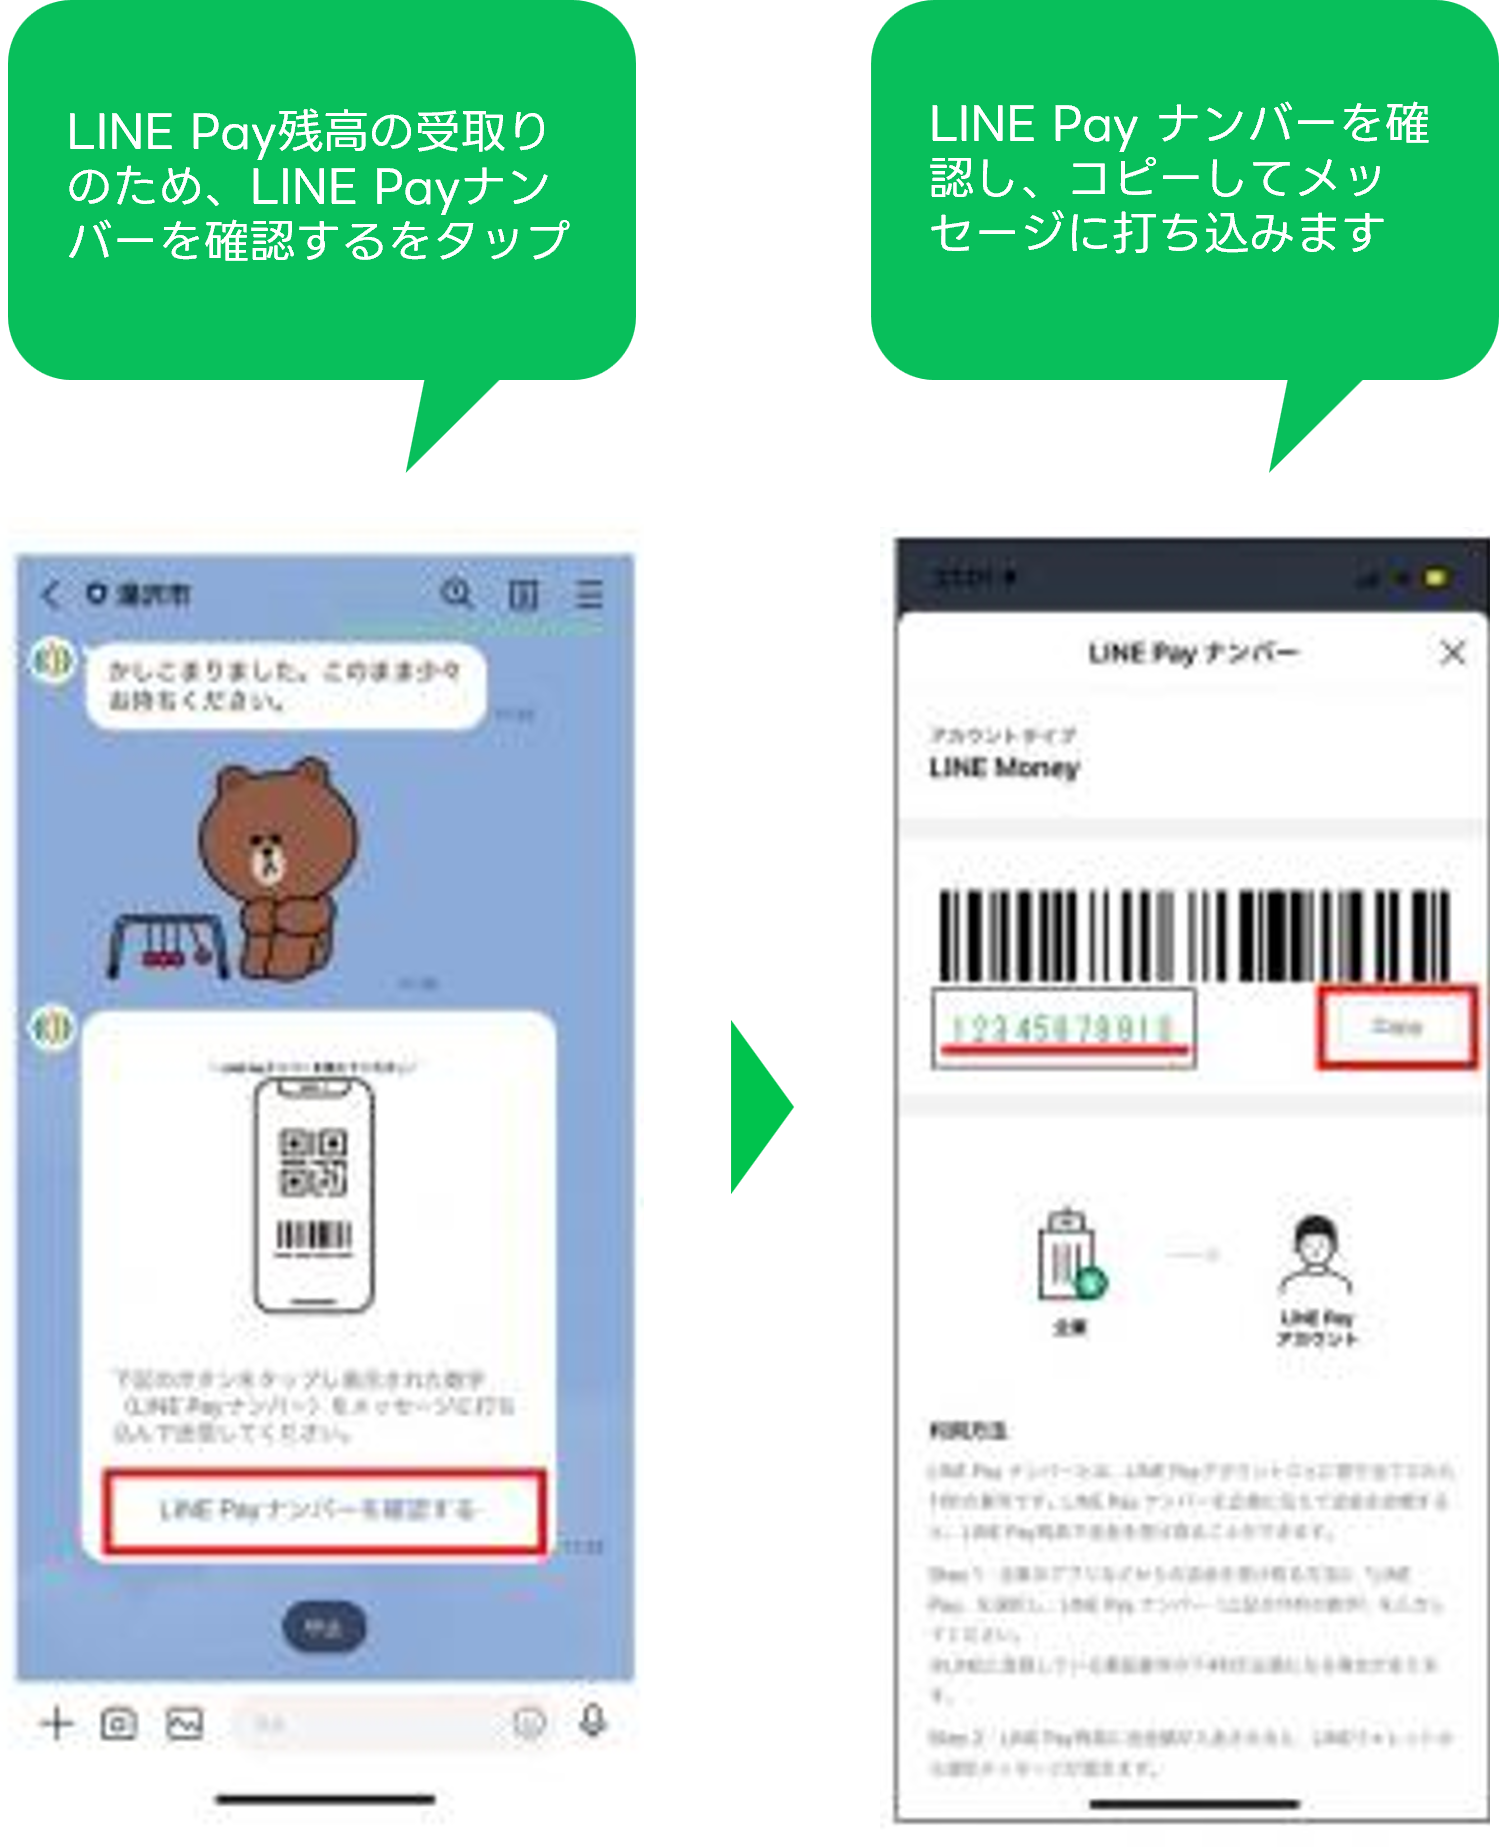 LINE
Payナンバーの確認.png